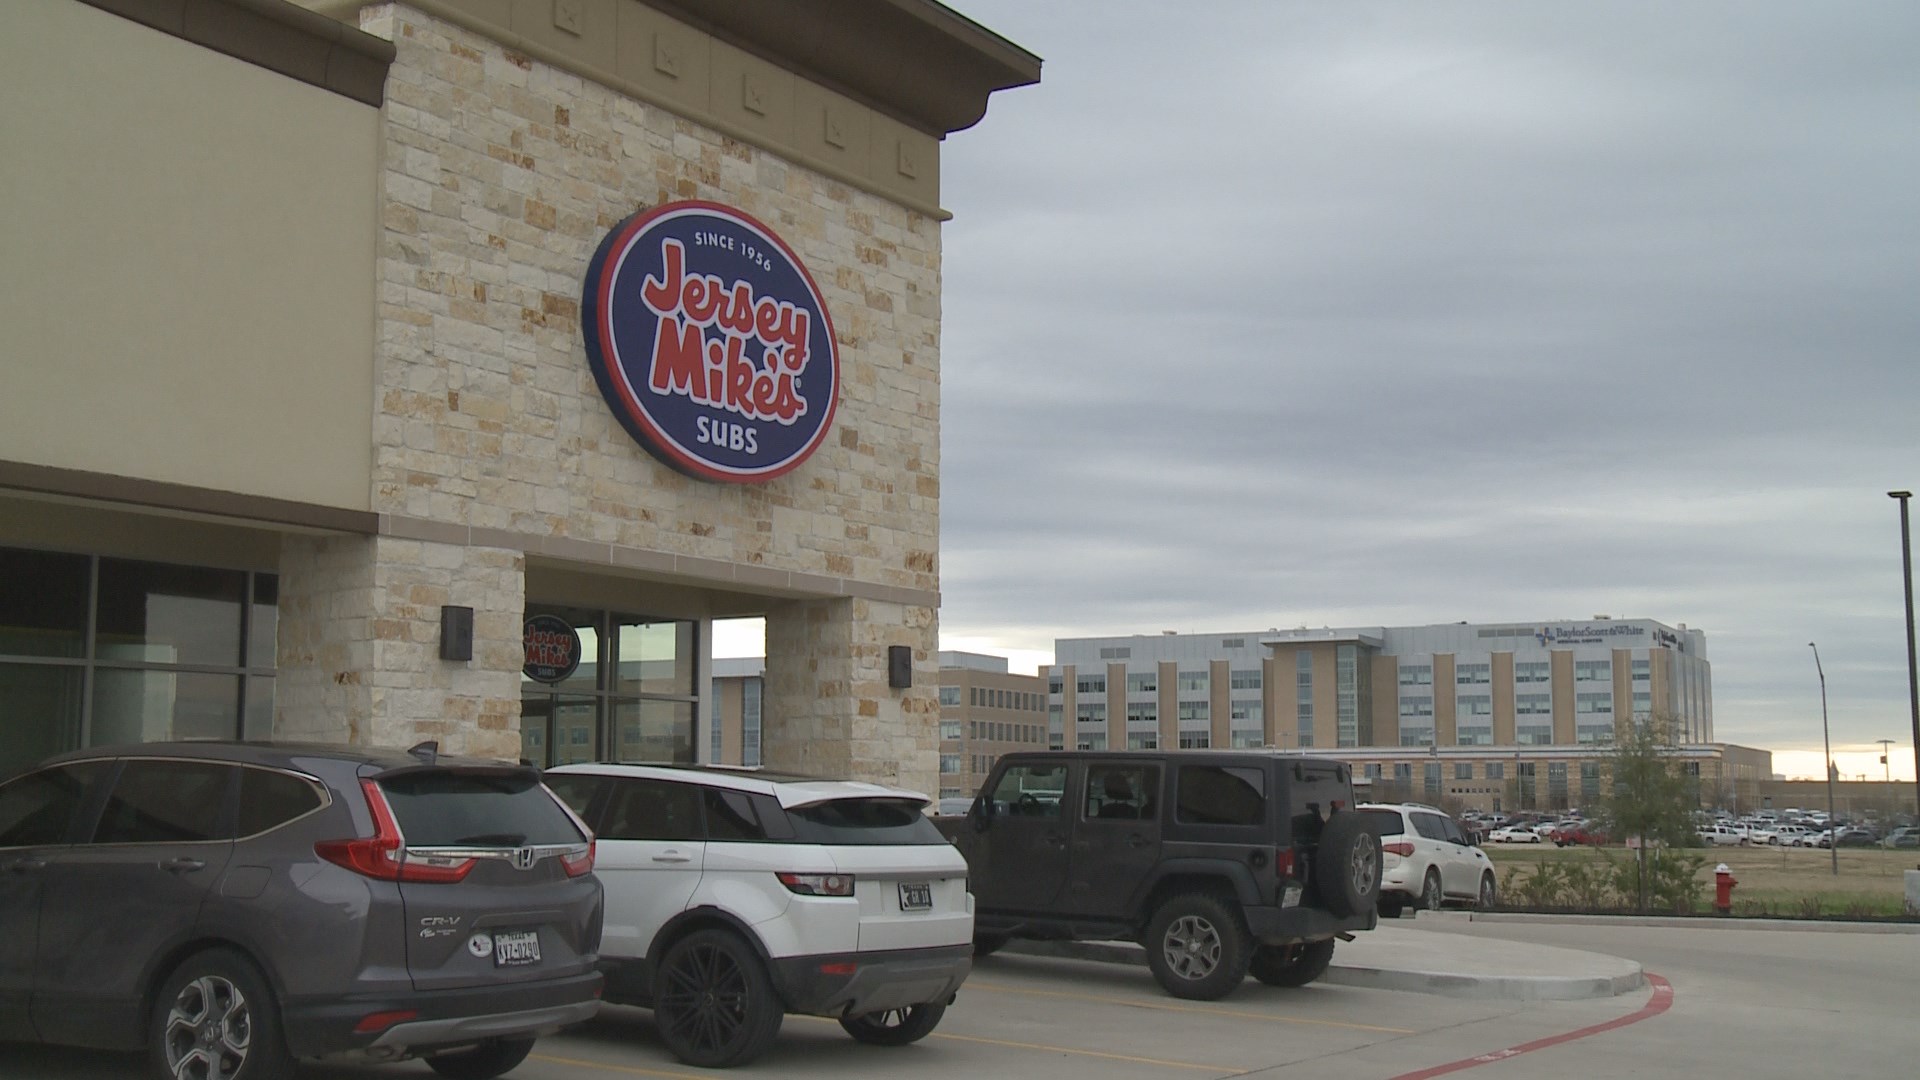 jersey mike's college park